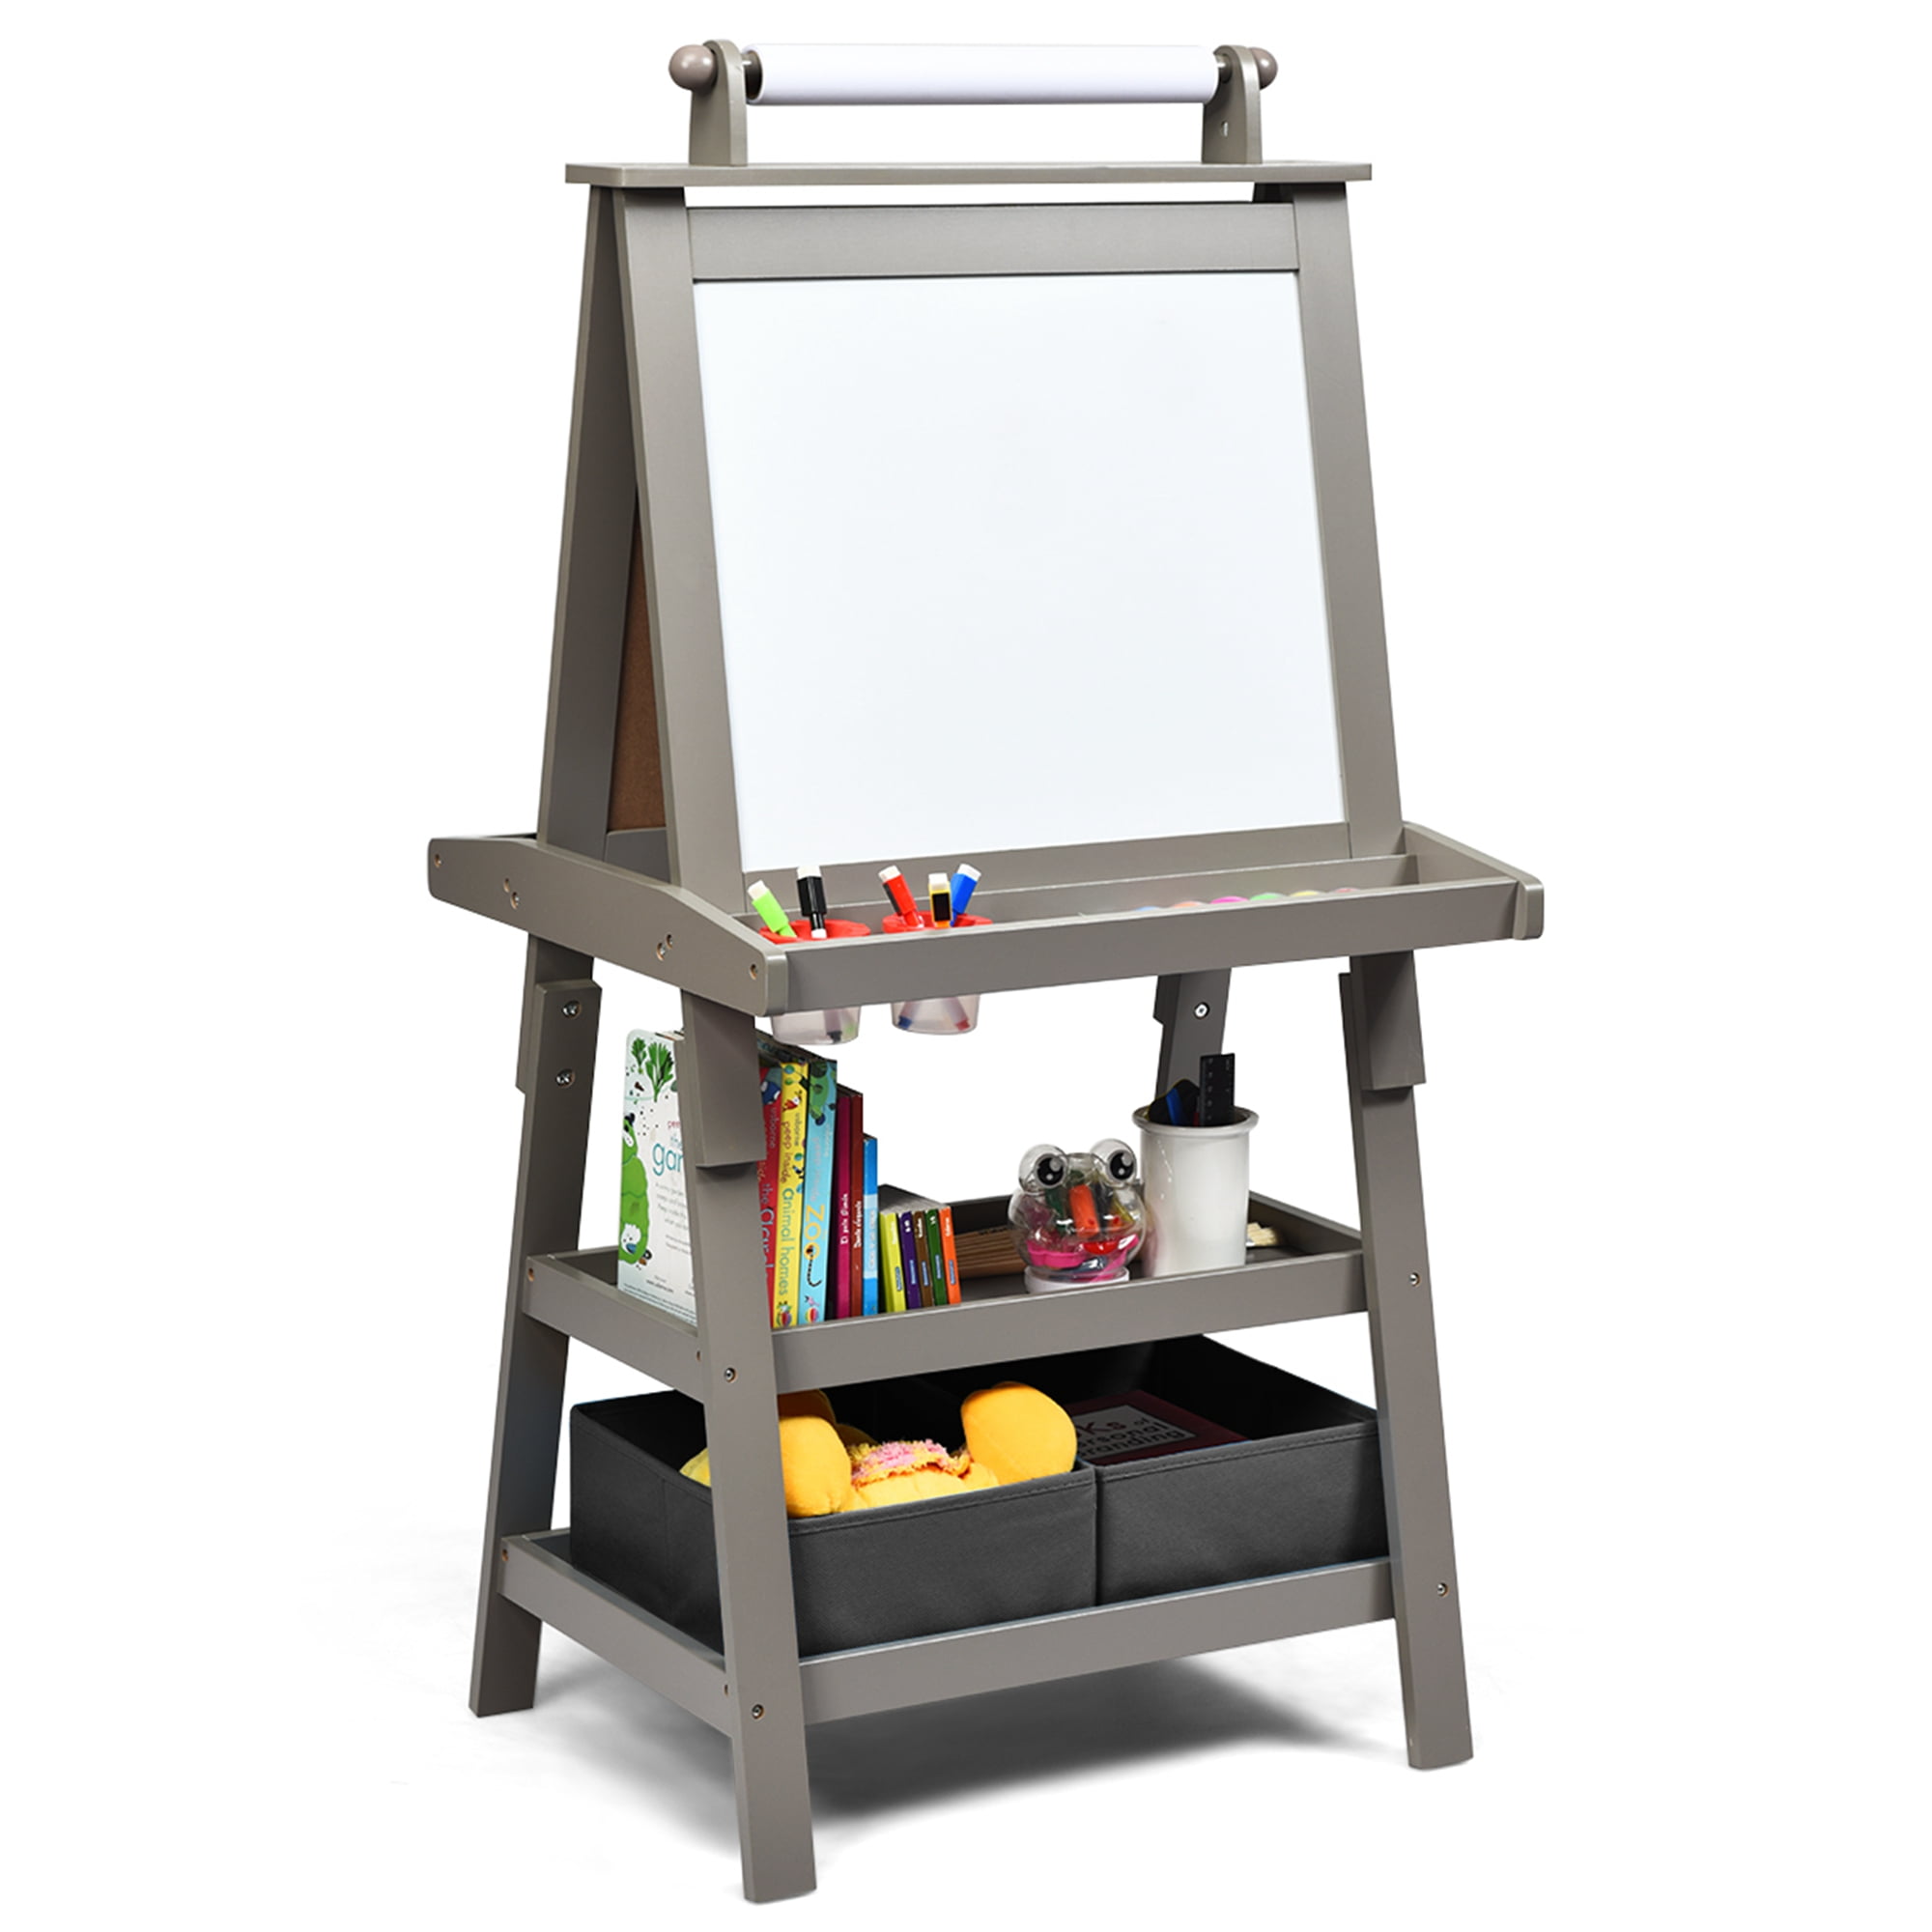 3 In 1 Kids Wooden Art Easel with Storage Baskets